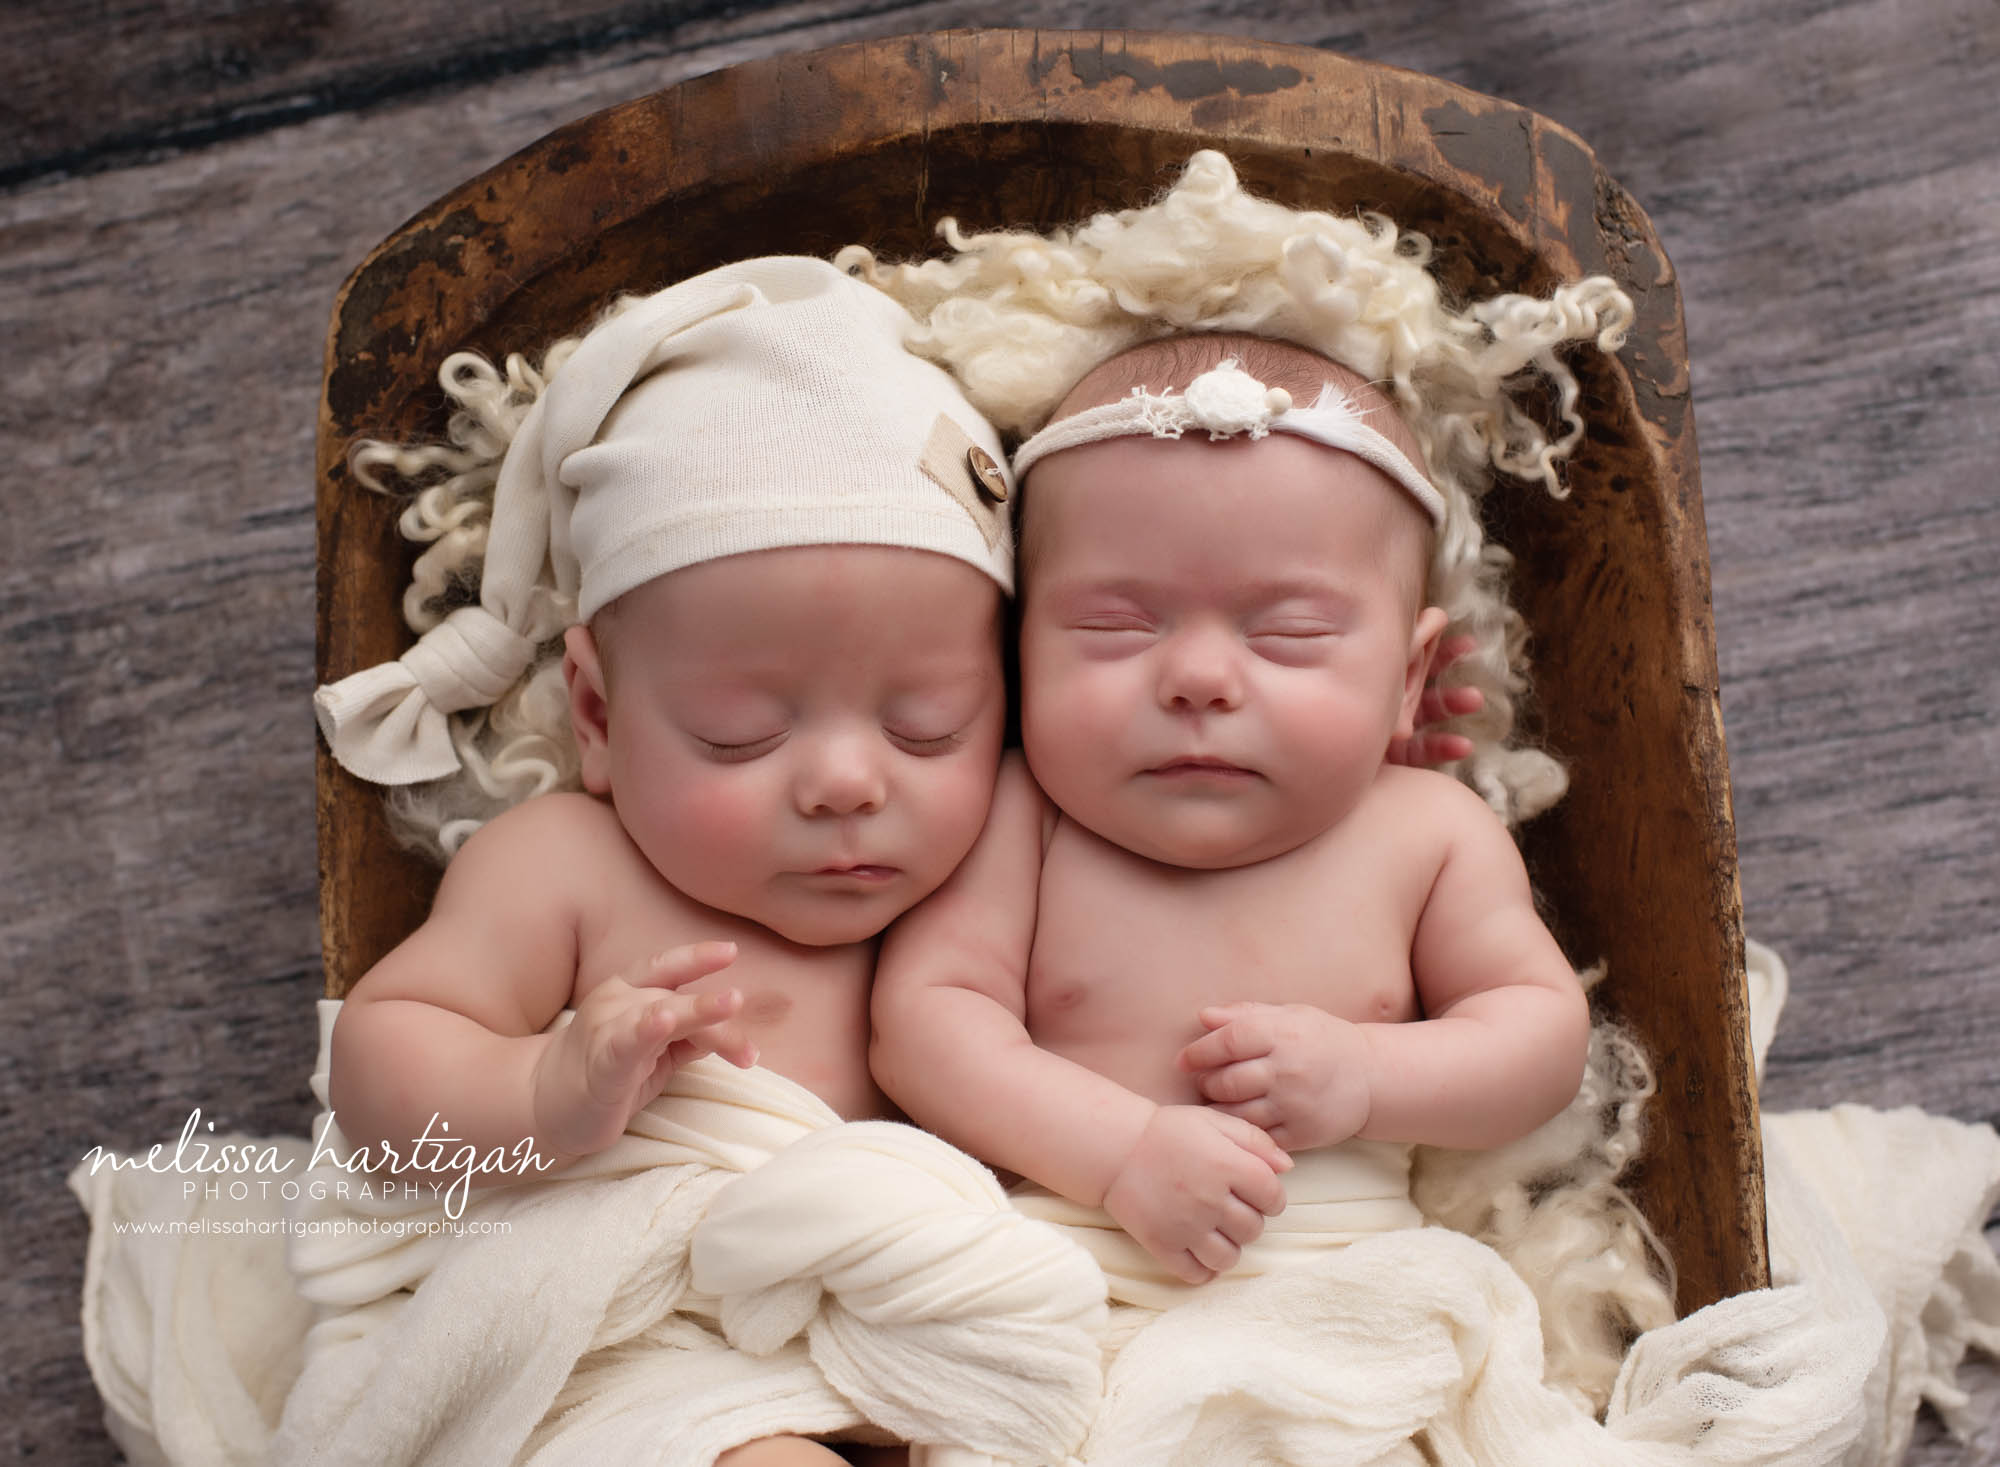 twin newborn babies posed together in wooden prop with cream layers and colors